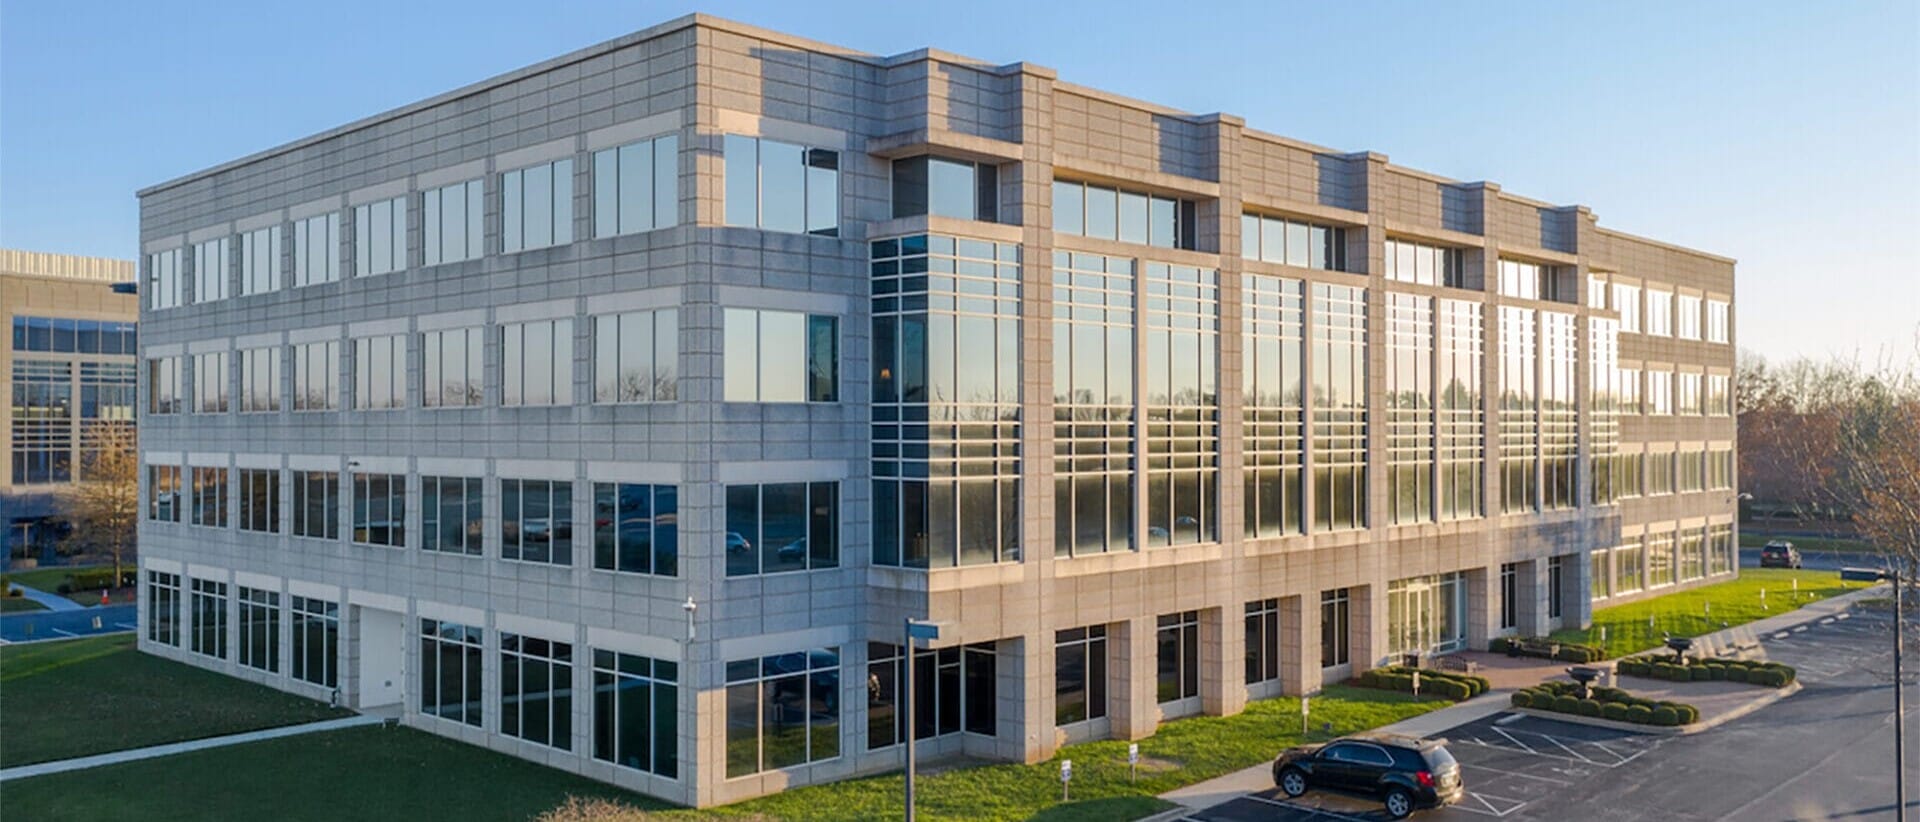 Modern three-story office building with large glass windows, surrounded by manicured lawns and a parking lot, under a clear blue sky, ideal for single tenant net leased investments nationwide.